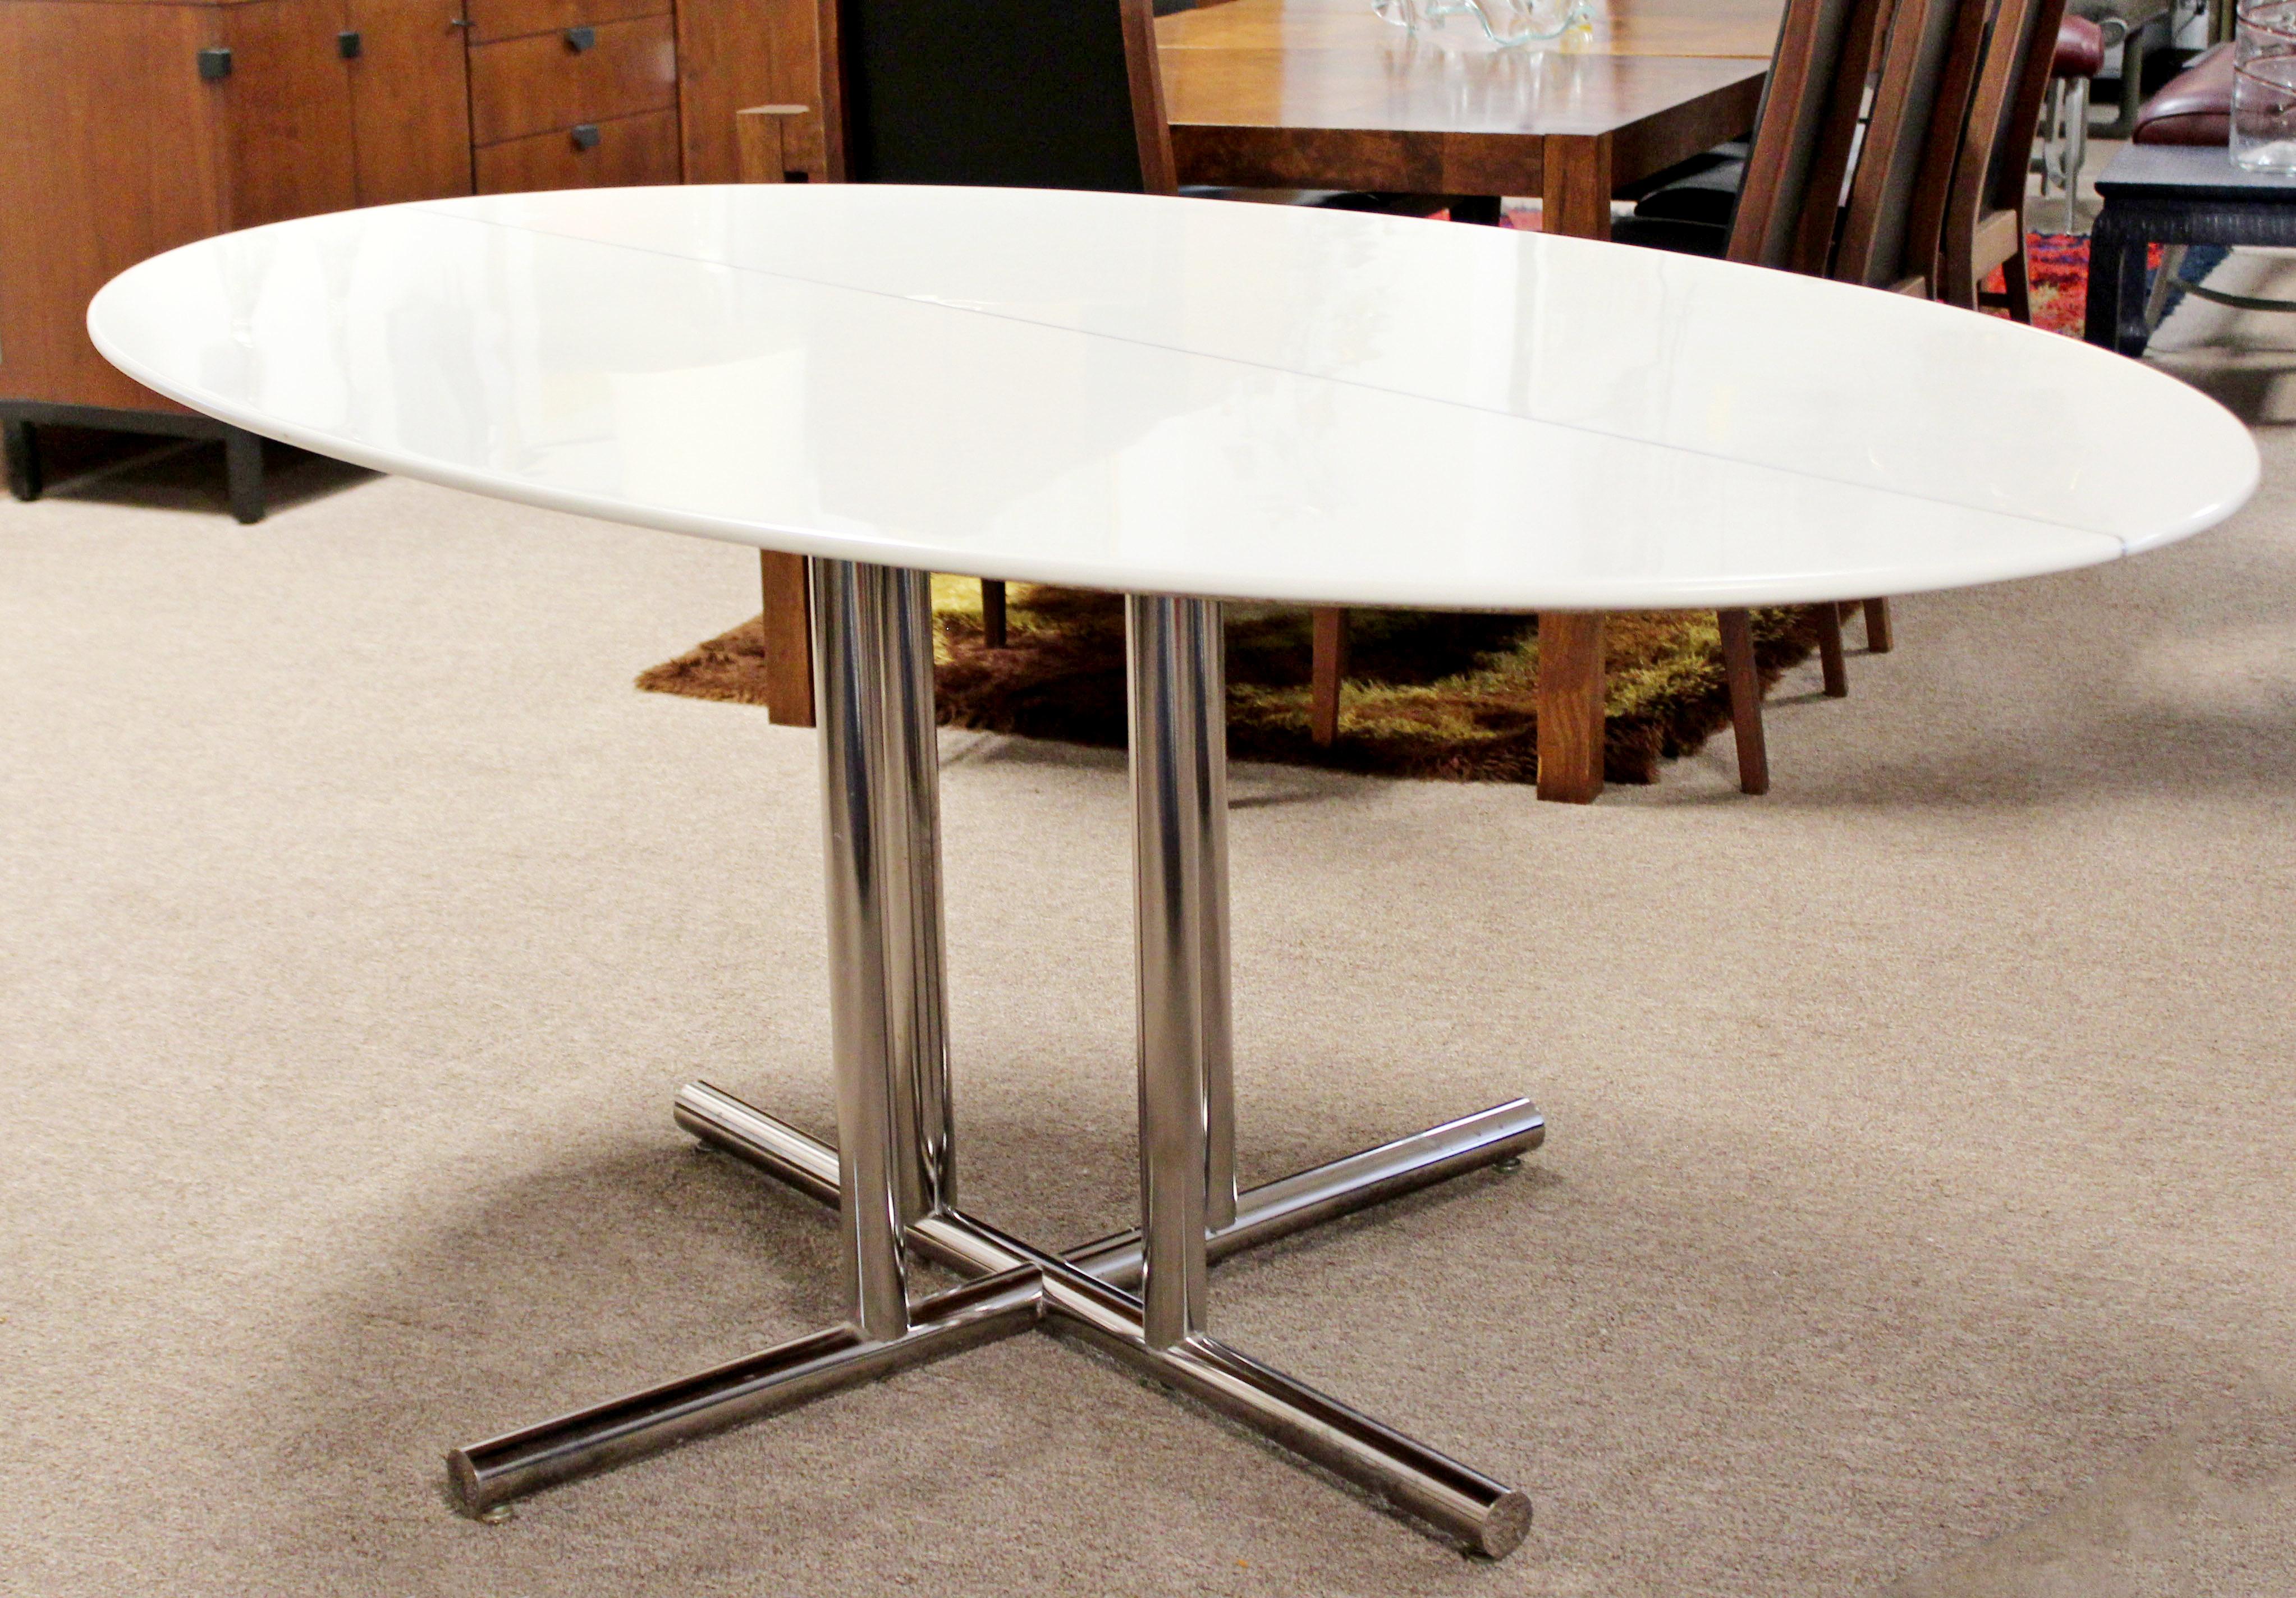 For your consideration is a phenomenal dining table, which features an ovular, vitrolite style surface on a sculptural, tubular chrome base. In very good condition. The dimensions are 72